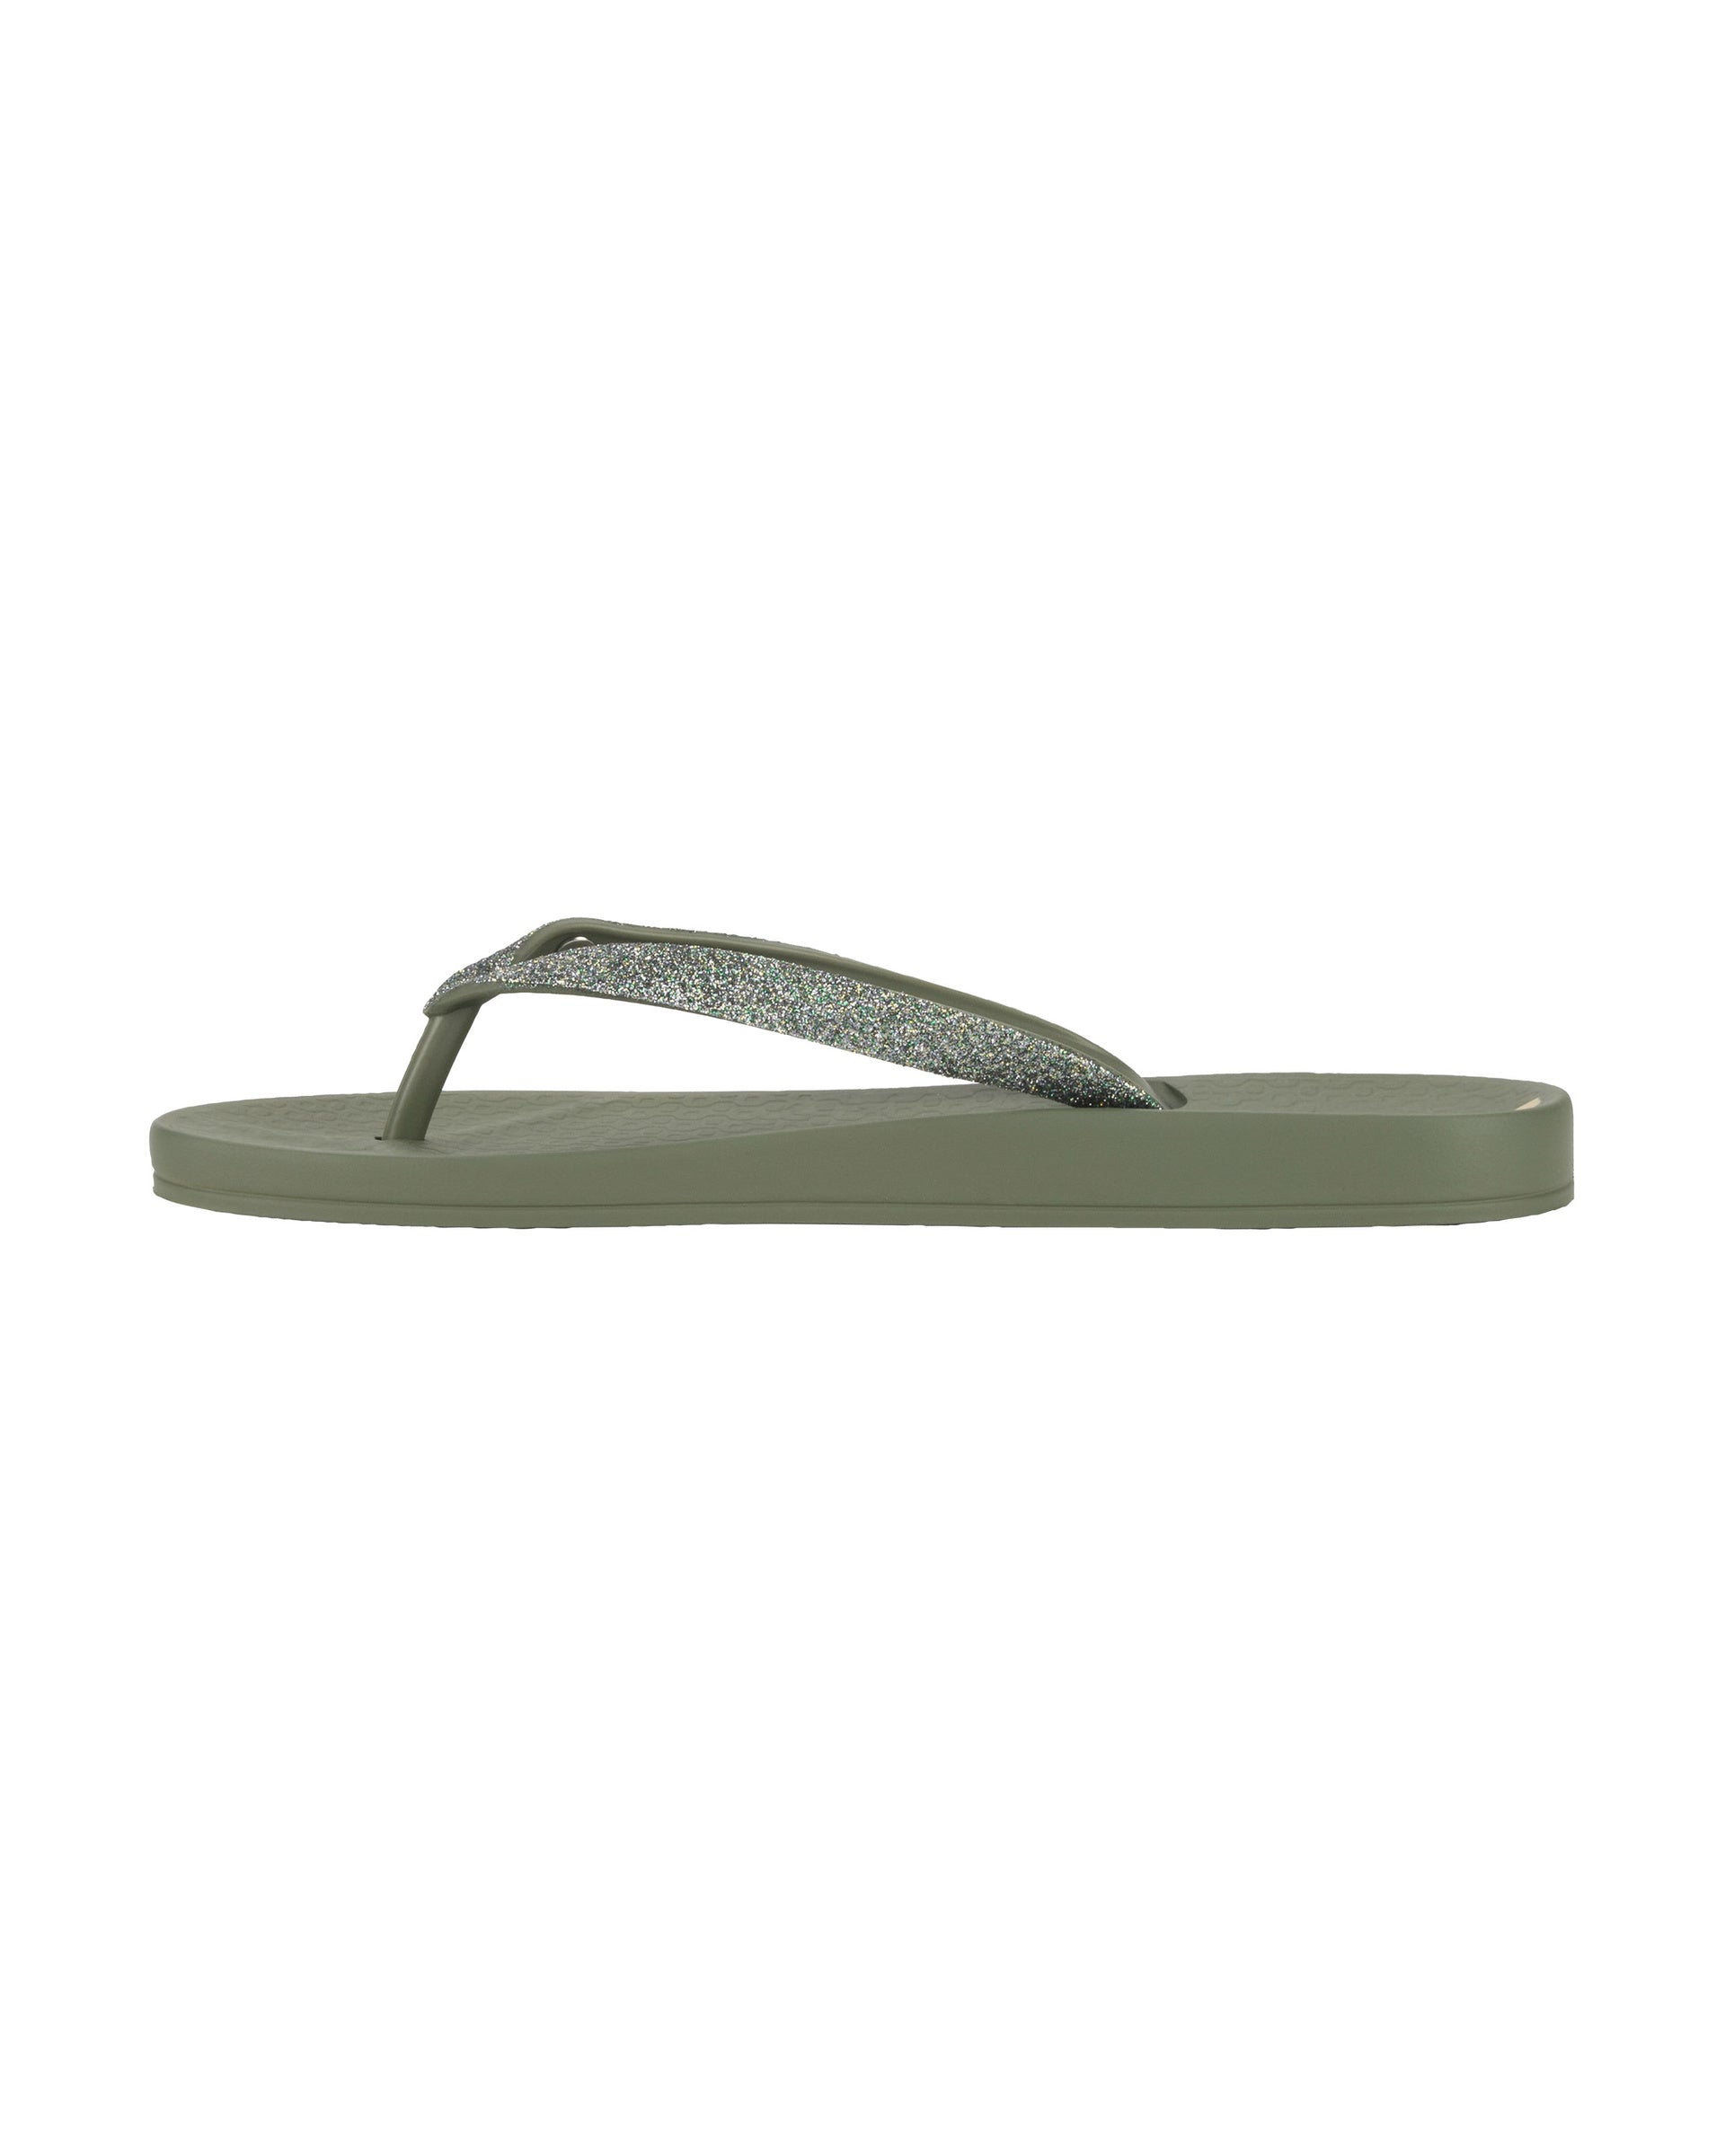 Inner side view of a green Ipanema Ana Sparkle women's flip flop with glitter green straps.